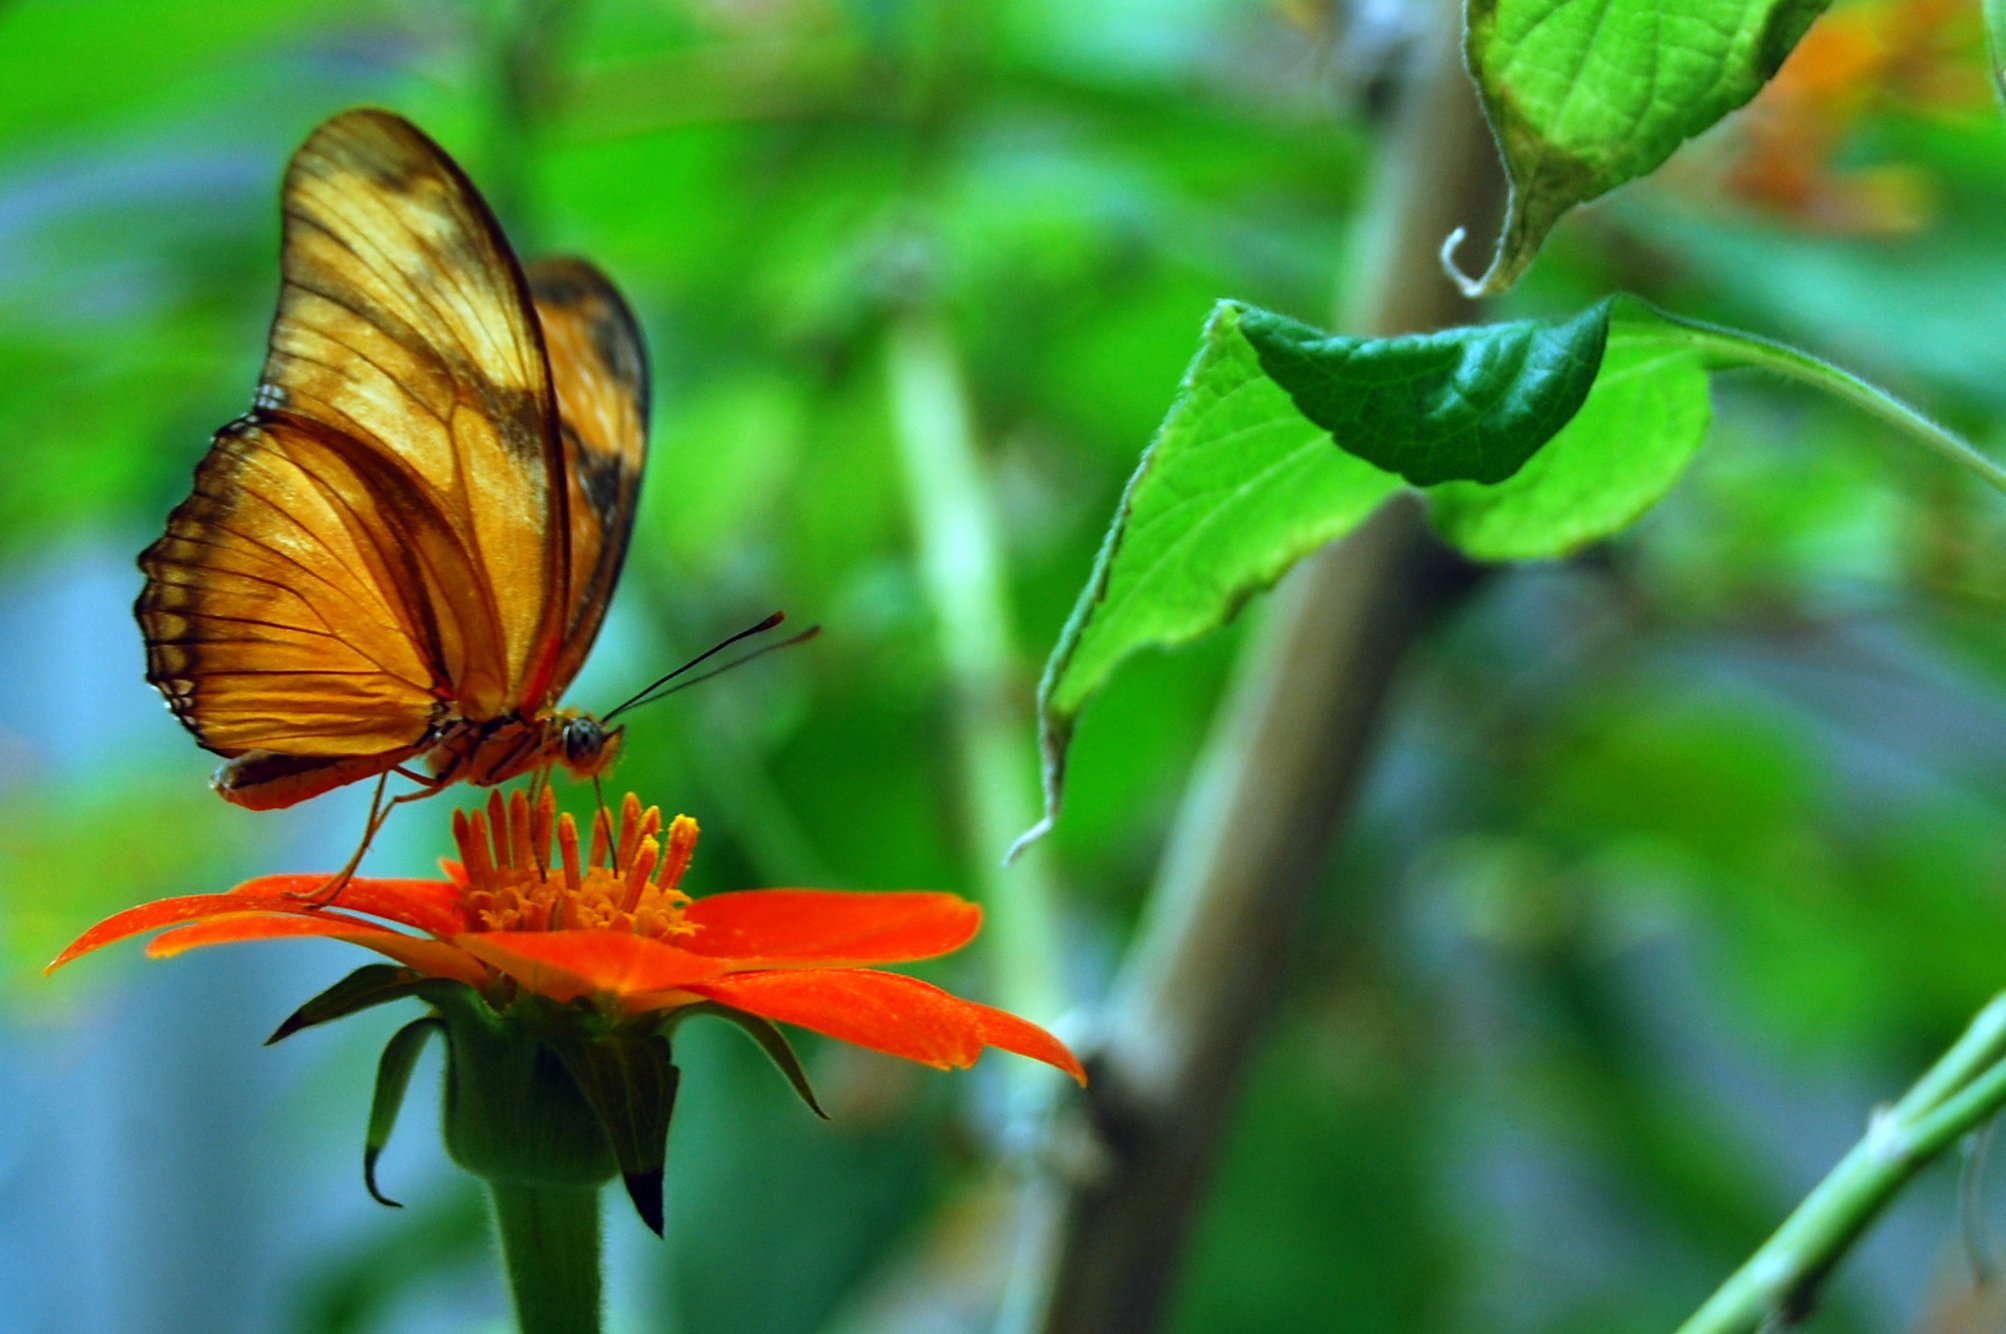 the erfly is orange and yellow, flying over a bright flower